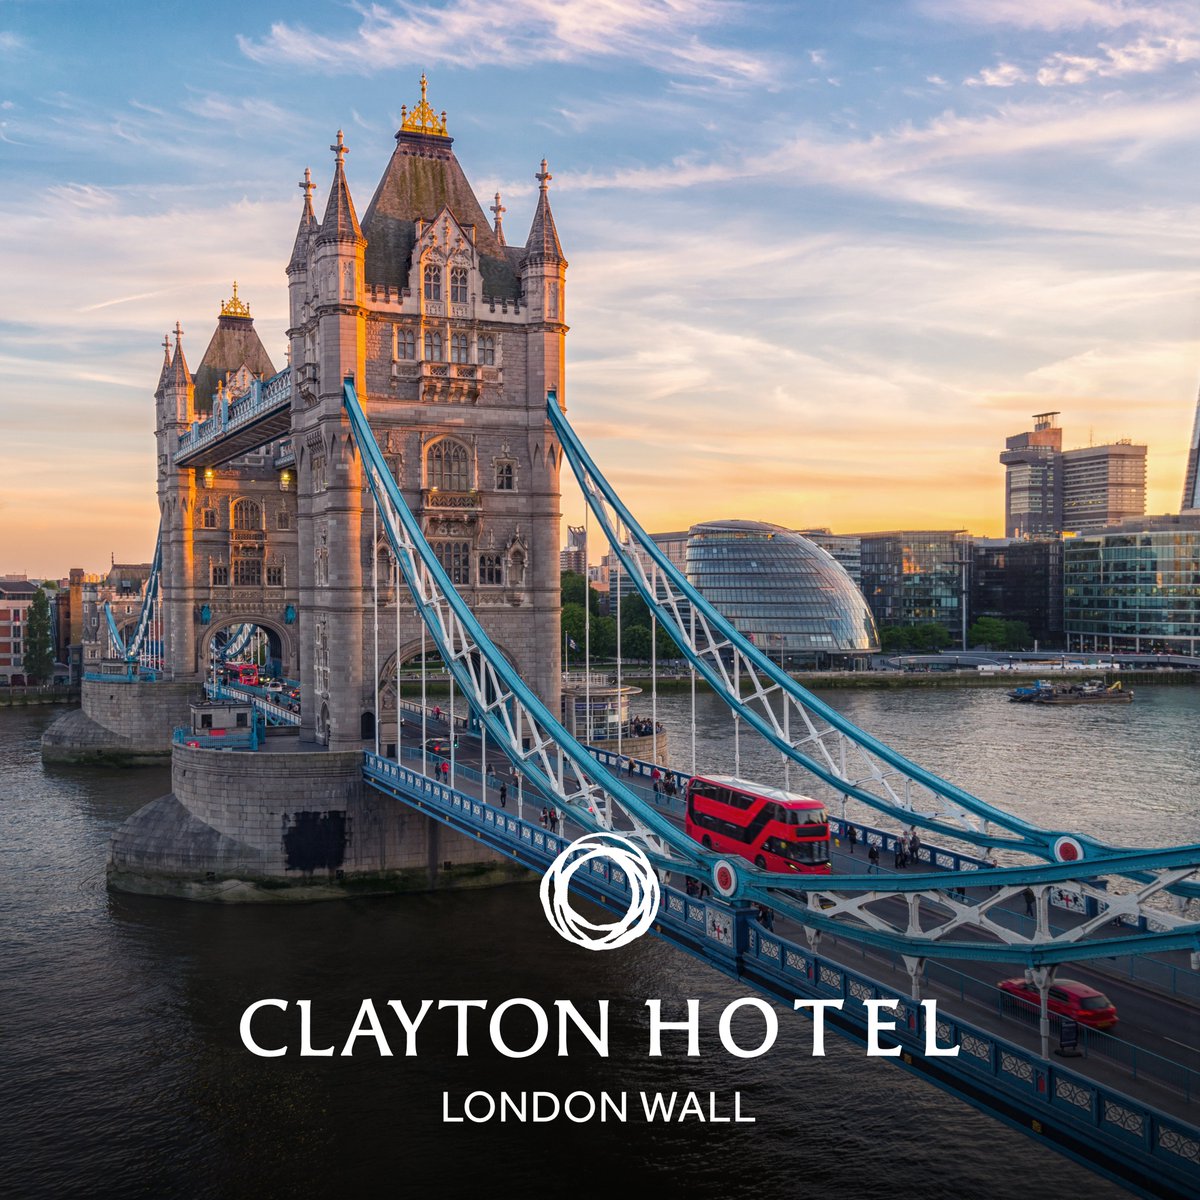 Introducing Clayton Hotel London Wall, our 26th Clayton Hotel. Situated in London's Square Mile, this four-star hotel strikes the perfect balance of luxury & leisure, with iconic landmarks nearby. Learn more: claytonhotellondonwall.com #claytonhotels #london